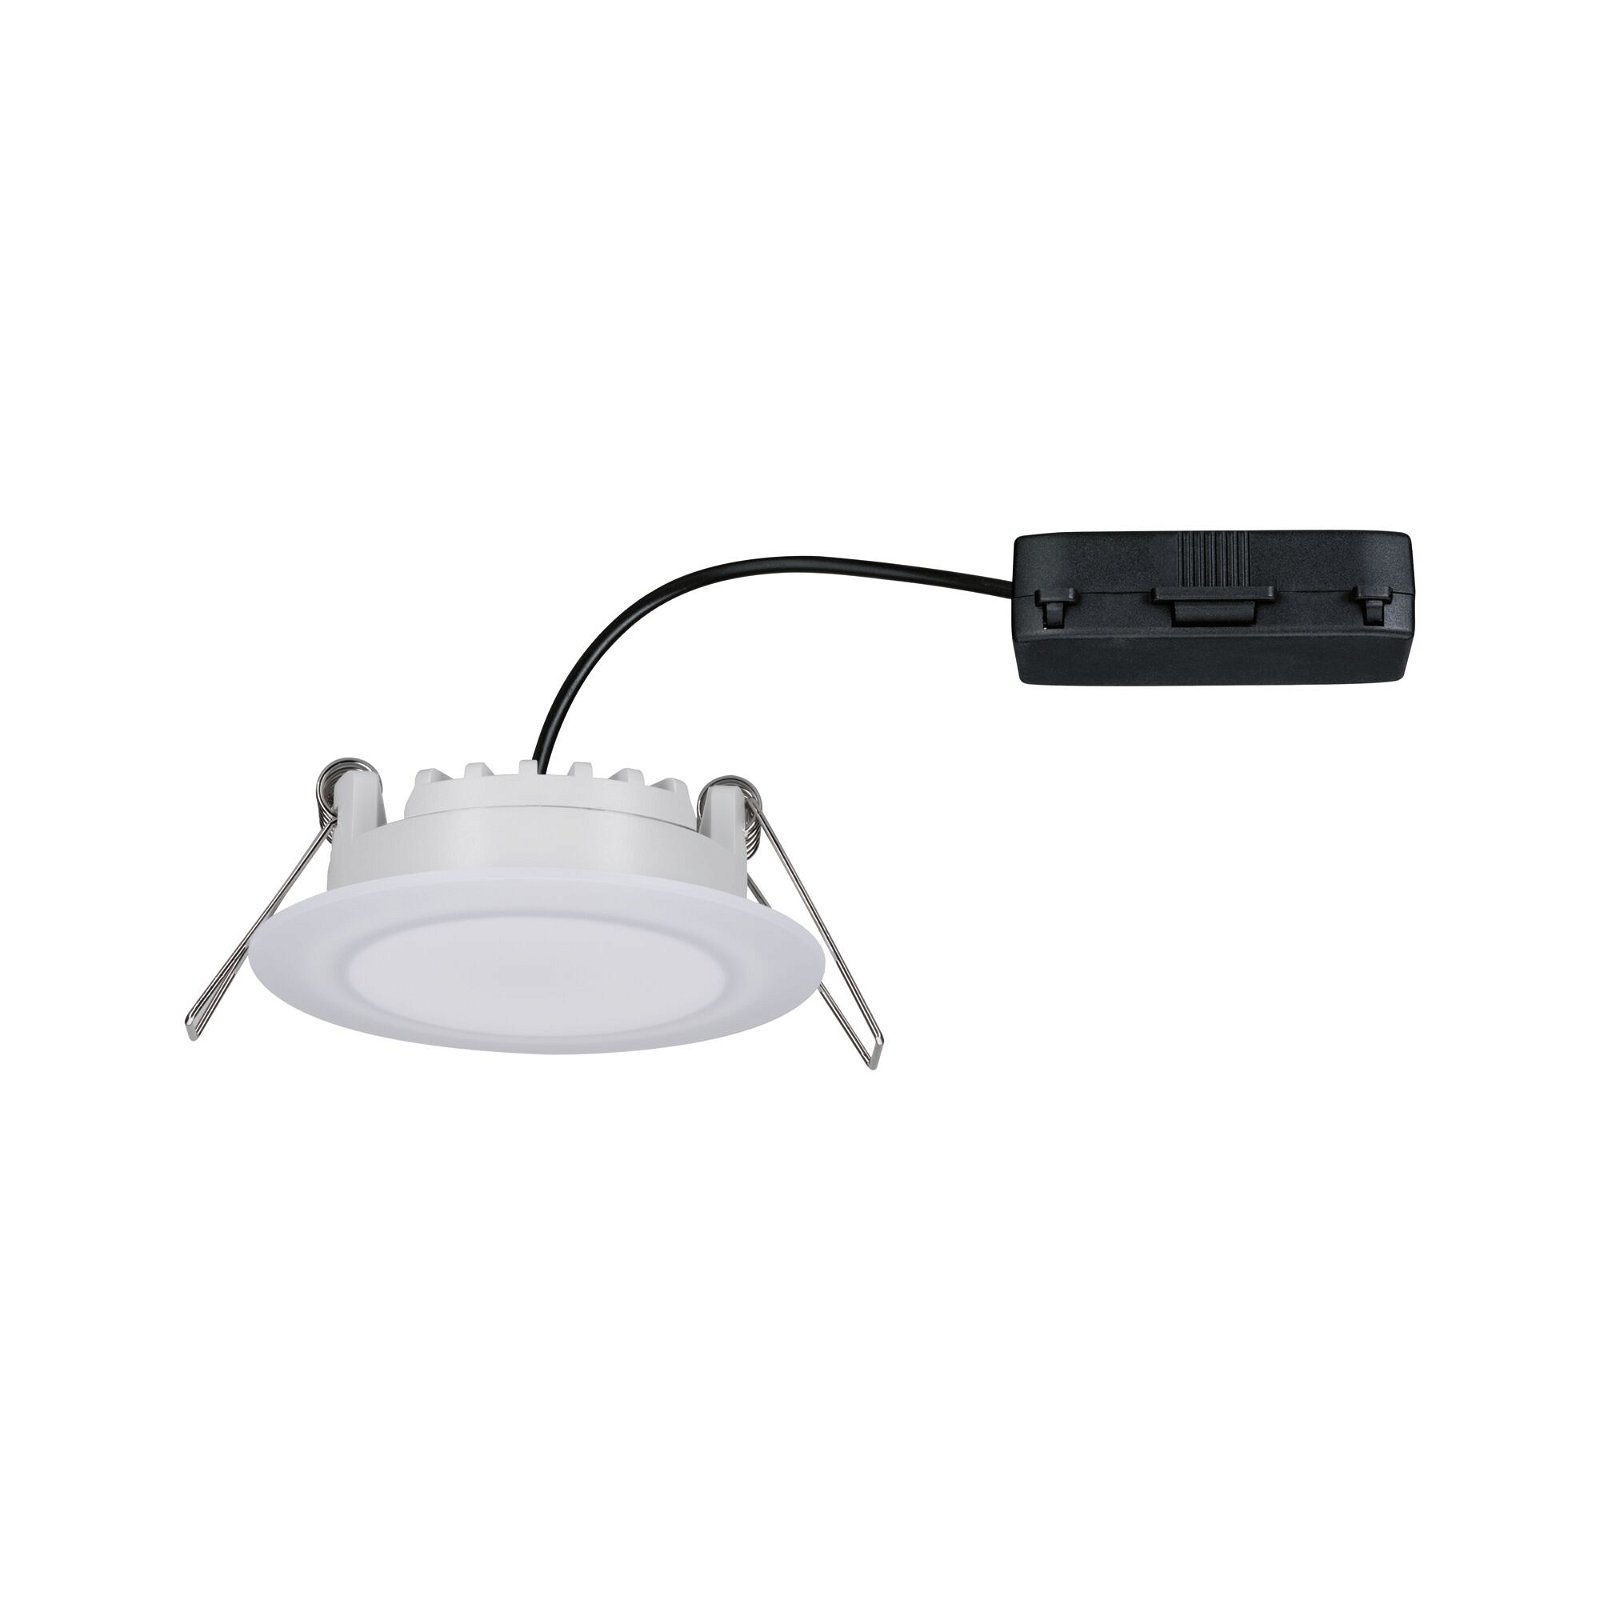 Premium LED Recessed luminaire Dim to Warm Suon IP44 round 90mm 5W 450lm 230V dimmable Dim to warm Satin/White